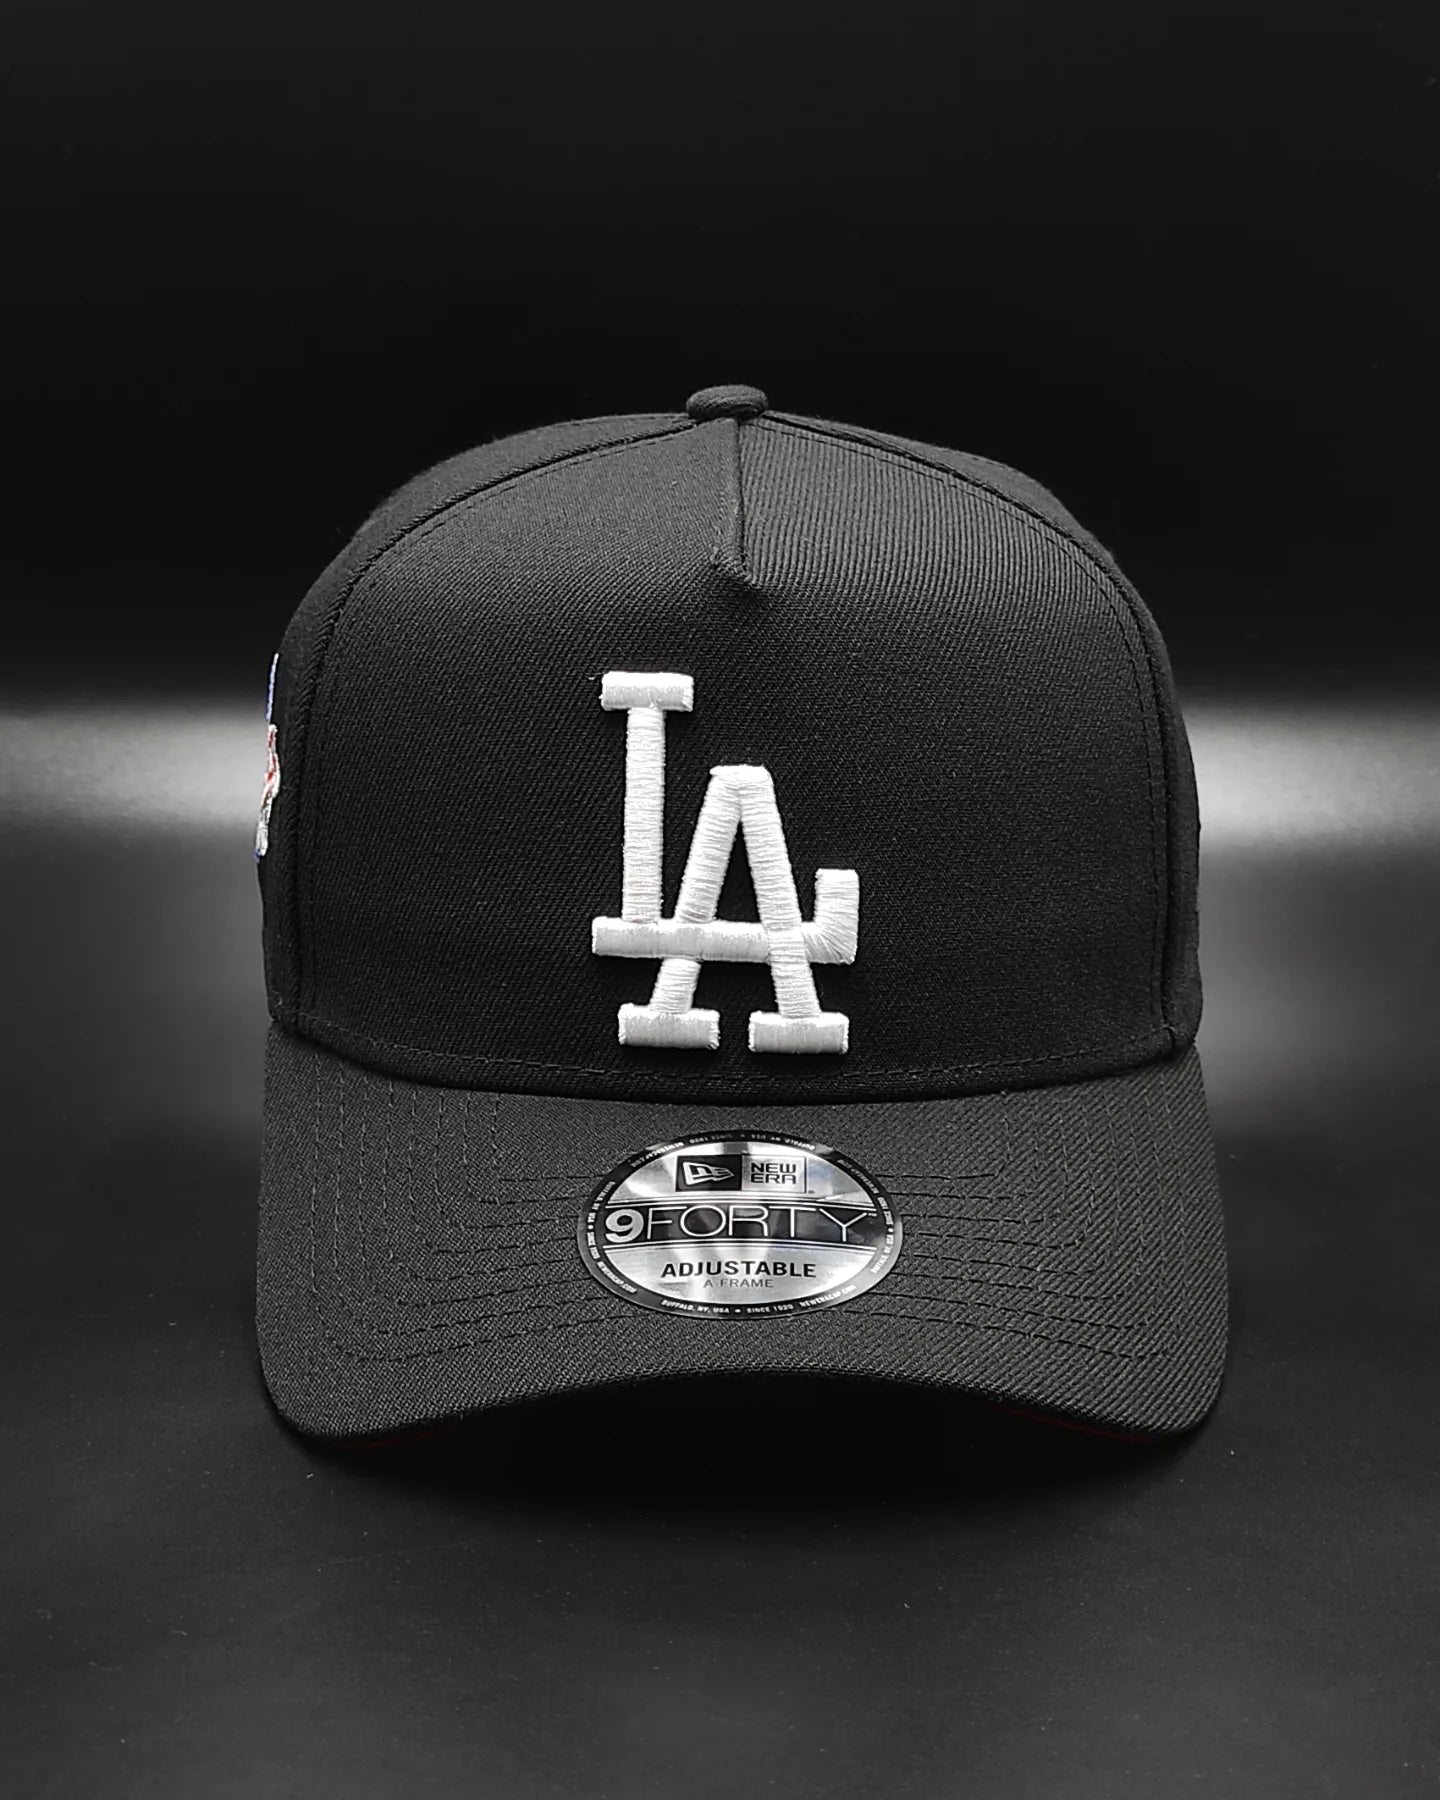 New Era Los Angeles Dodgers world series black red edition a frame snapback hat